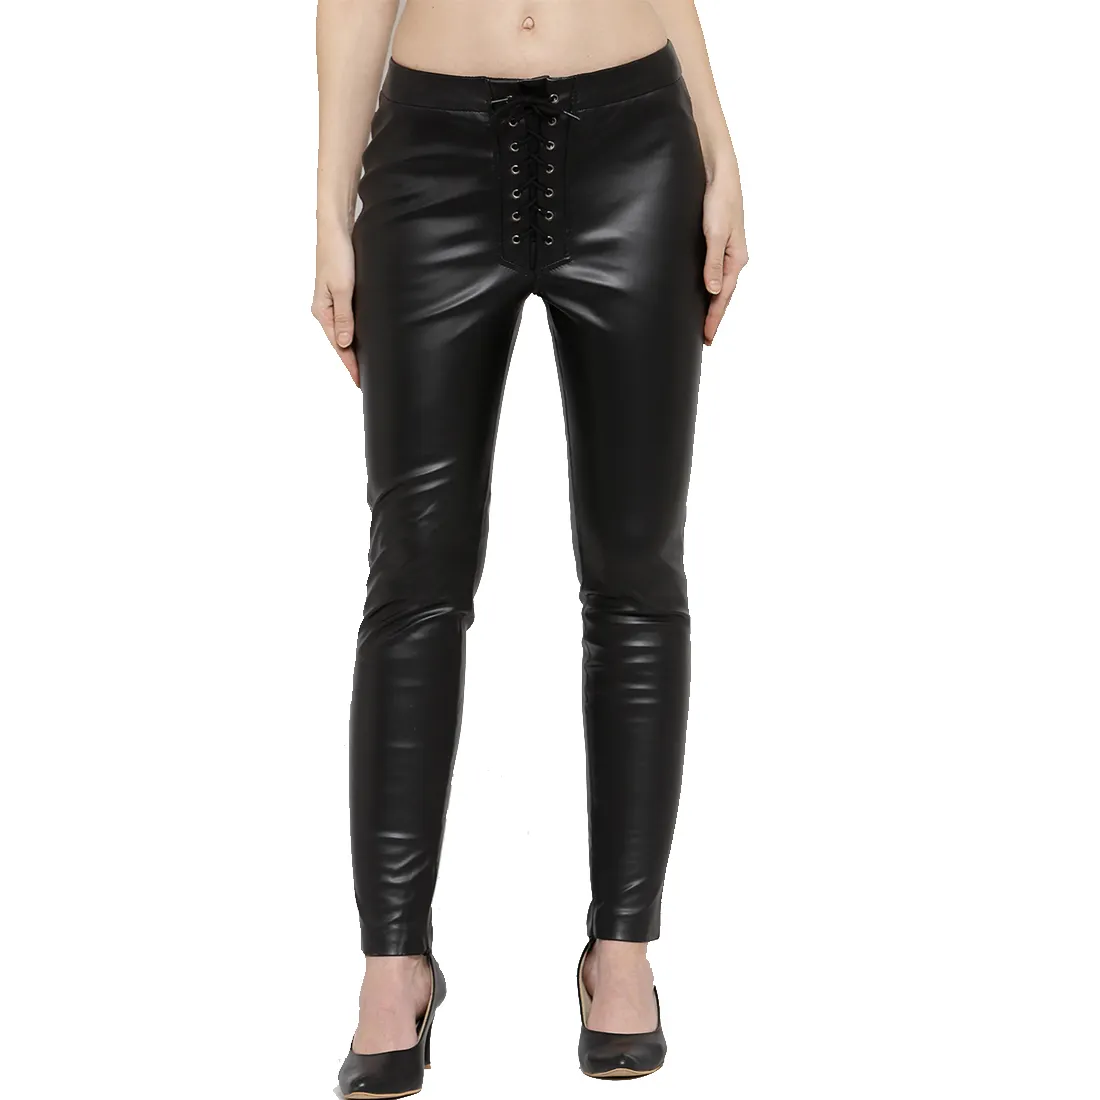 New Fashion Women top quality original Pants Front cowhide Leather Trousers Sexy Black Leather Pants